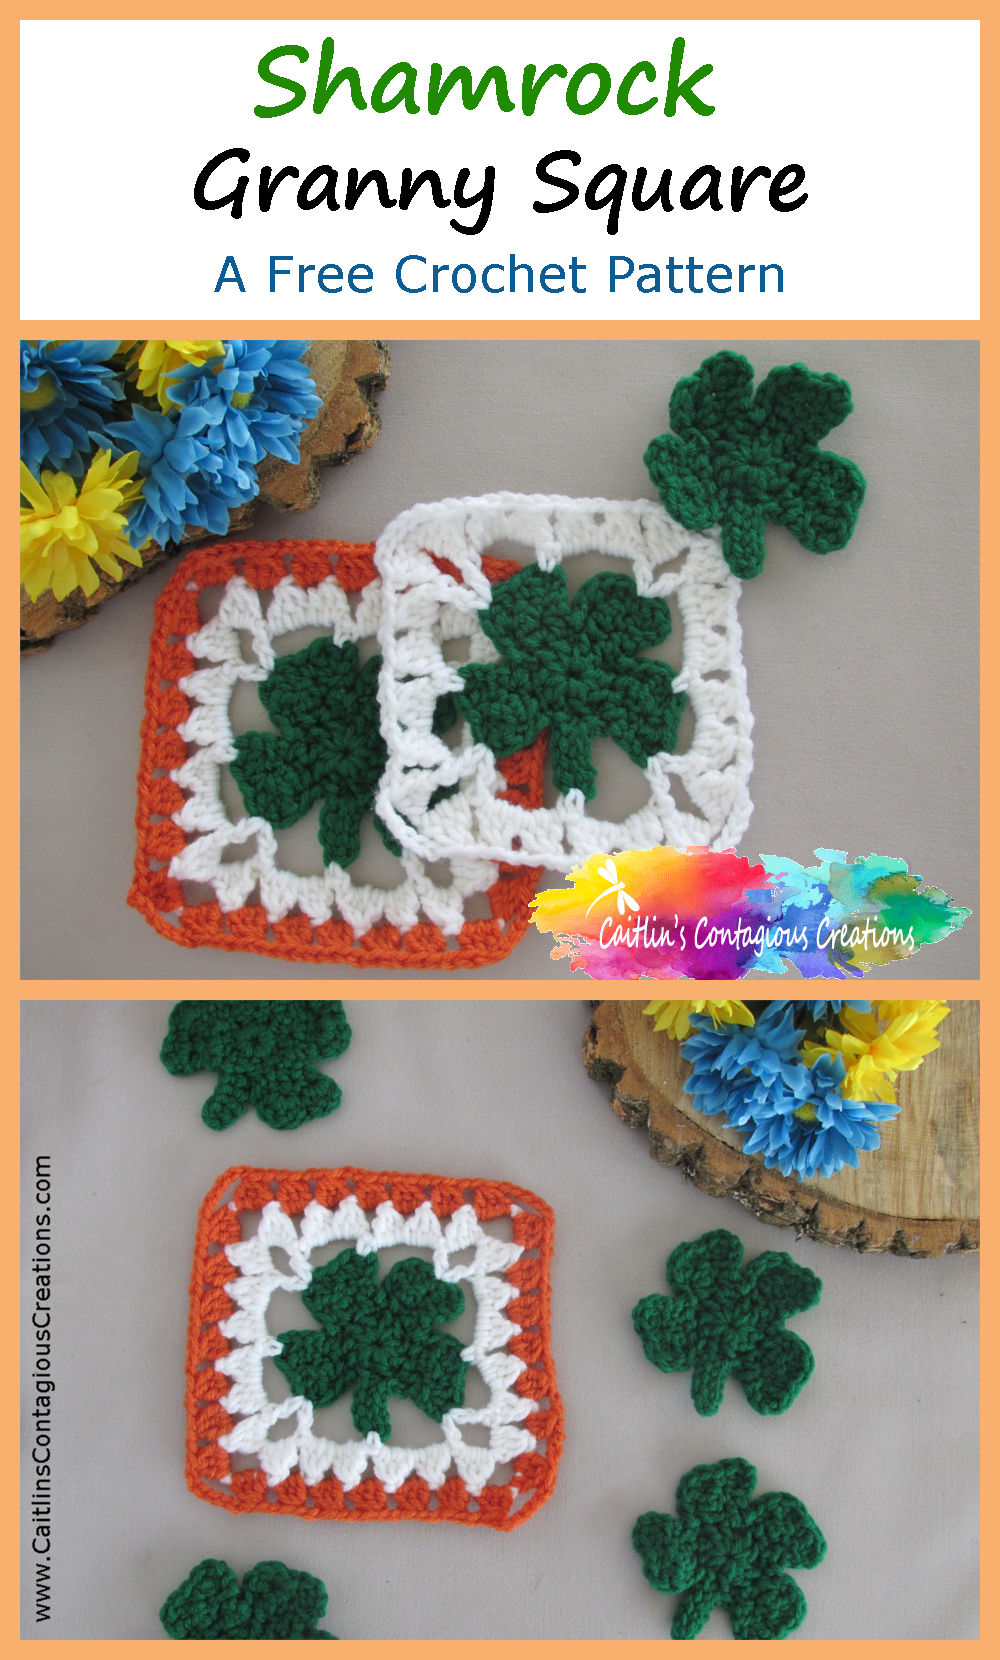 The Shamrock Granny Square crochet pattern from Caitlin's Contagious Creations has lots of pictures to help you along. This free and fun four 4 leaf clover crochet pattern is easy to complete and is great all year long, not just for St Paddy's Day. Make some Irish flower garlands, scarves, shawls, or blankets. Get started now!